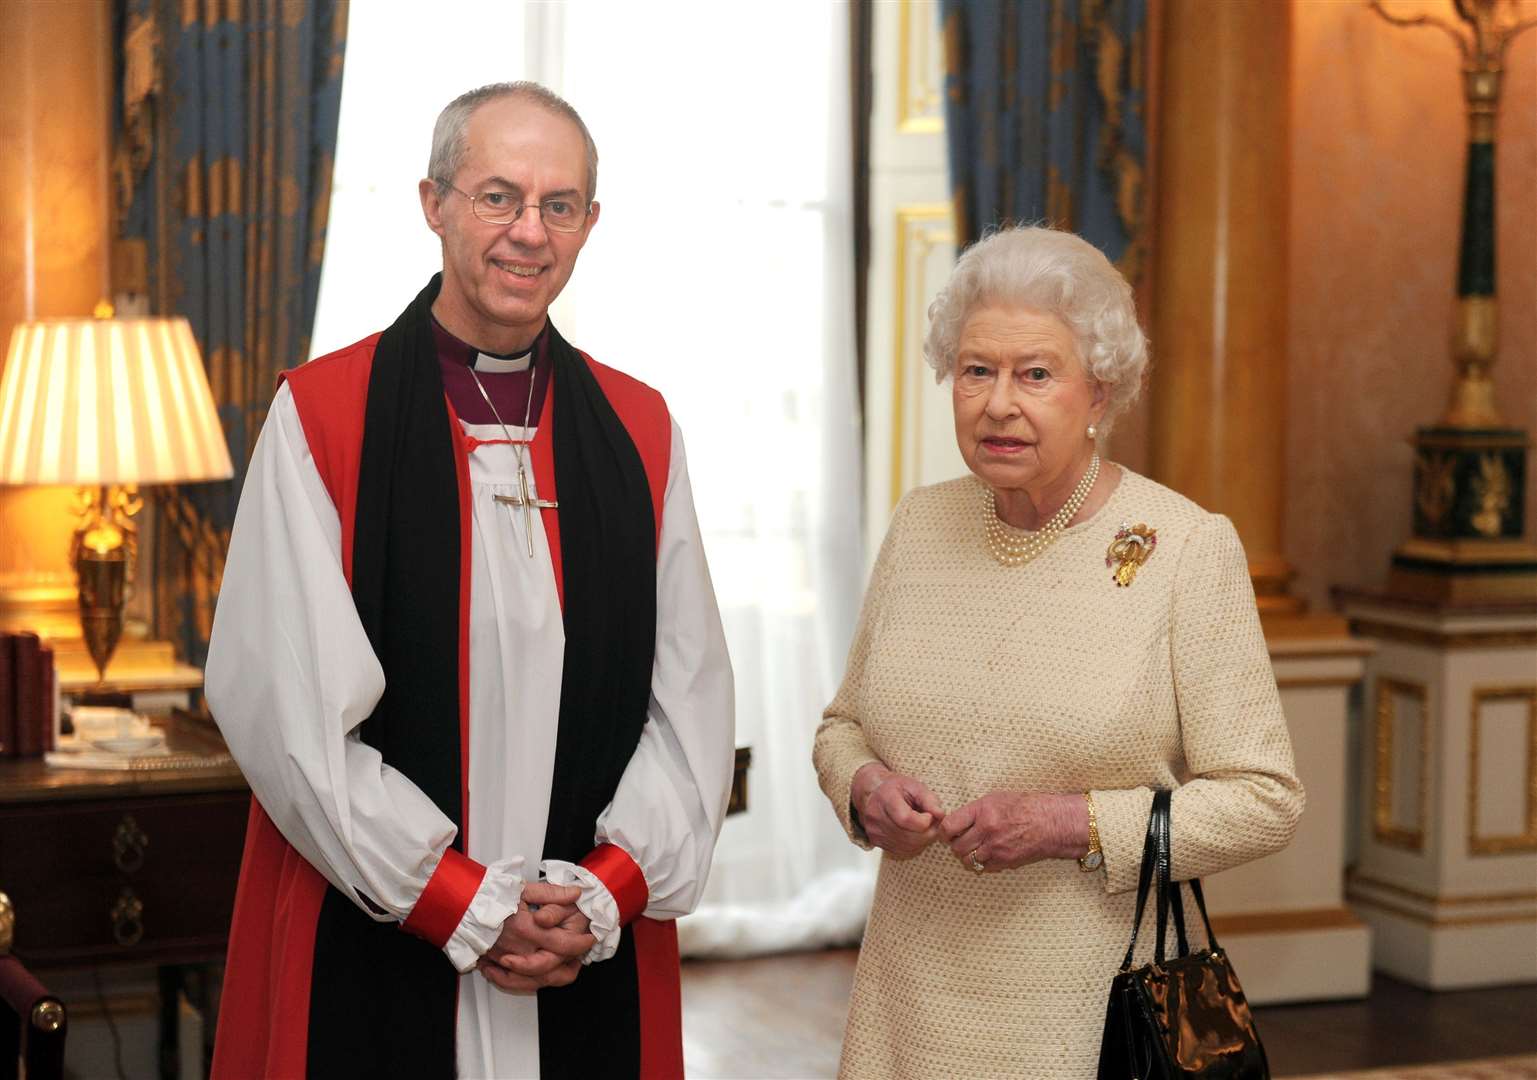 The Queen and the Archbishop of Canterbury in 2013 (Anthony Devlin/PA)